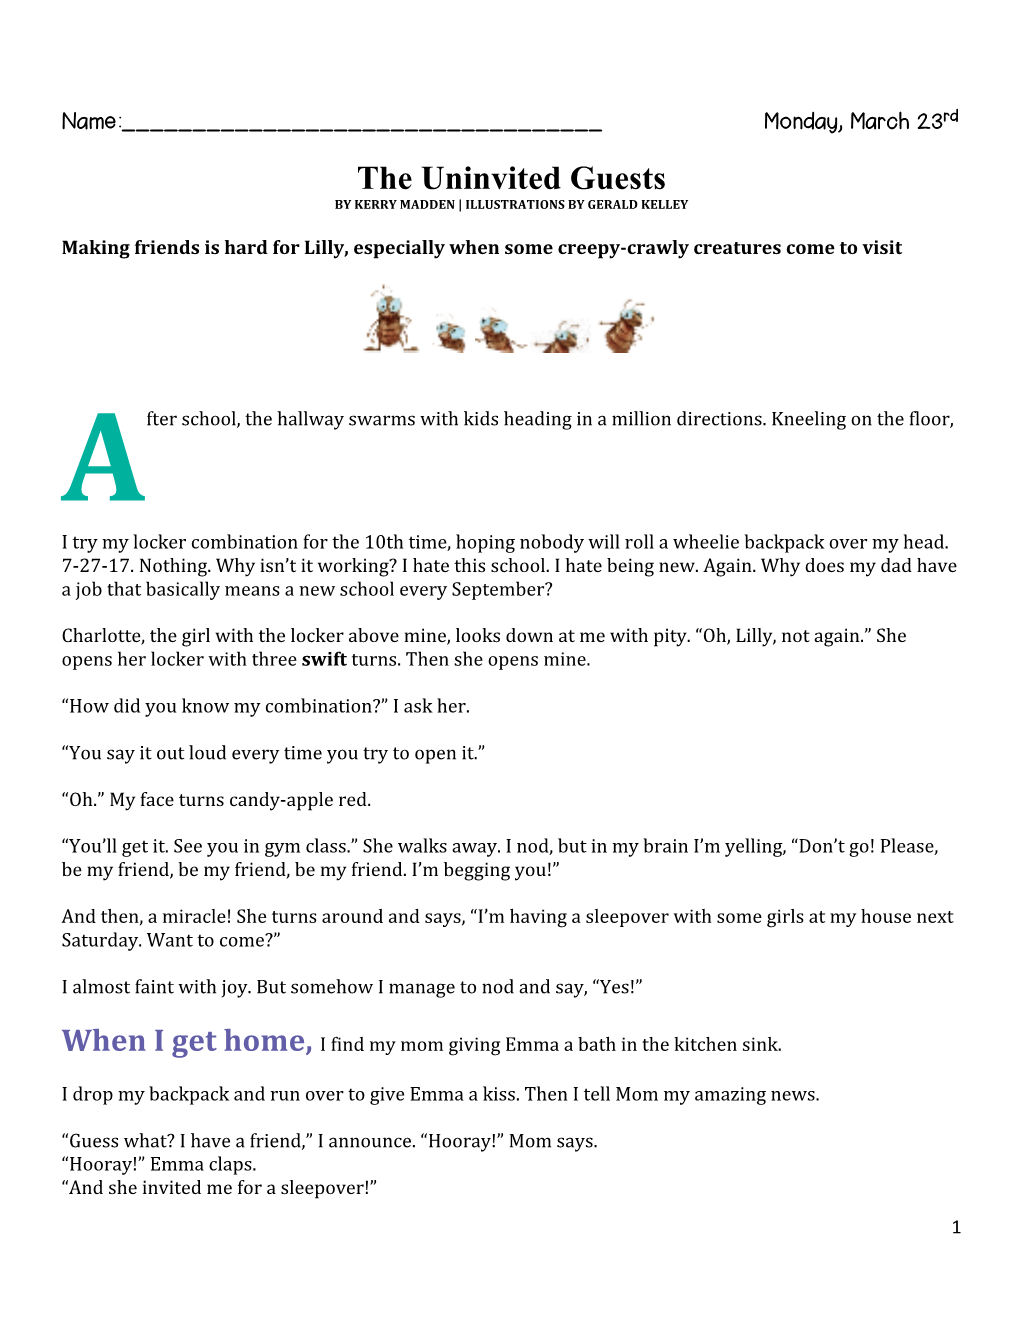 The Uninvited Guests by KERRY MADDEN | ILLUSTRATIONS by GERALD KELLEY